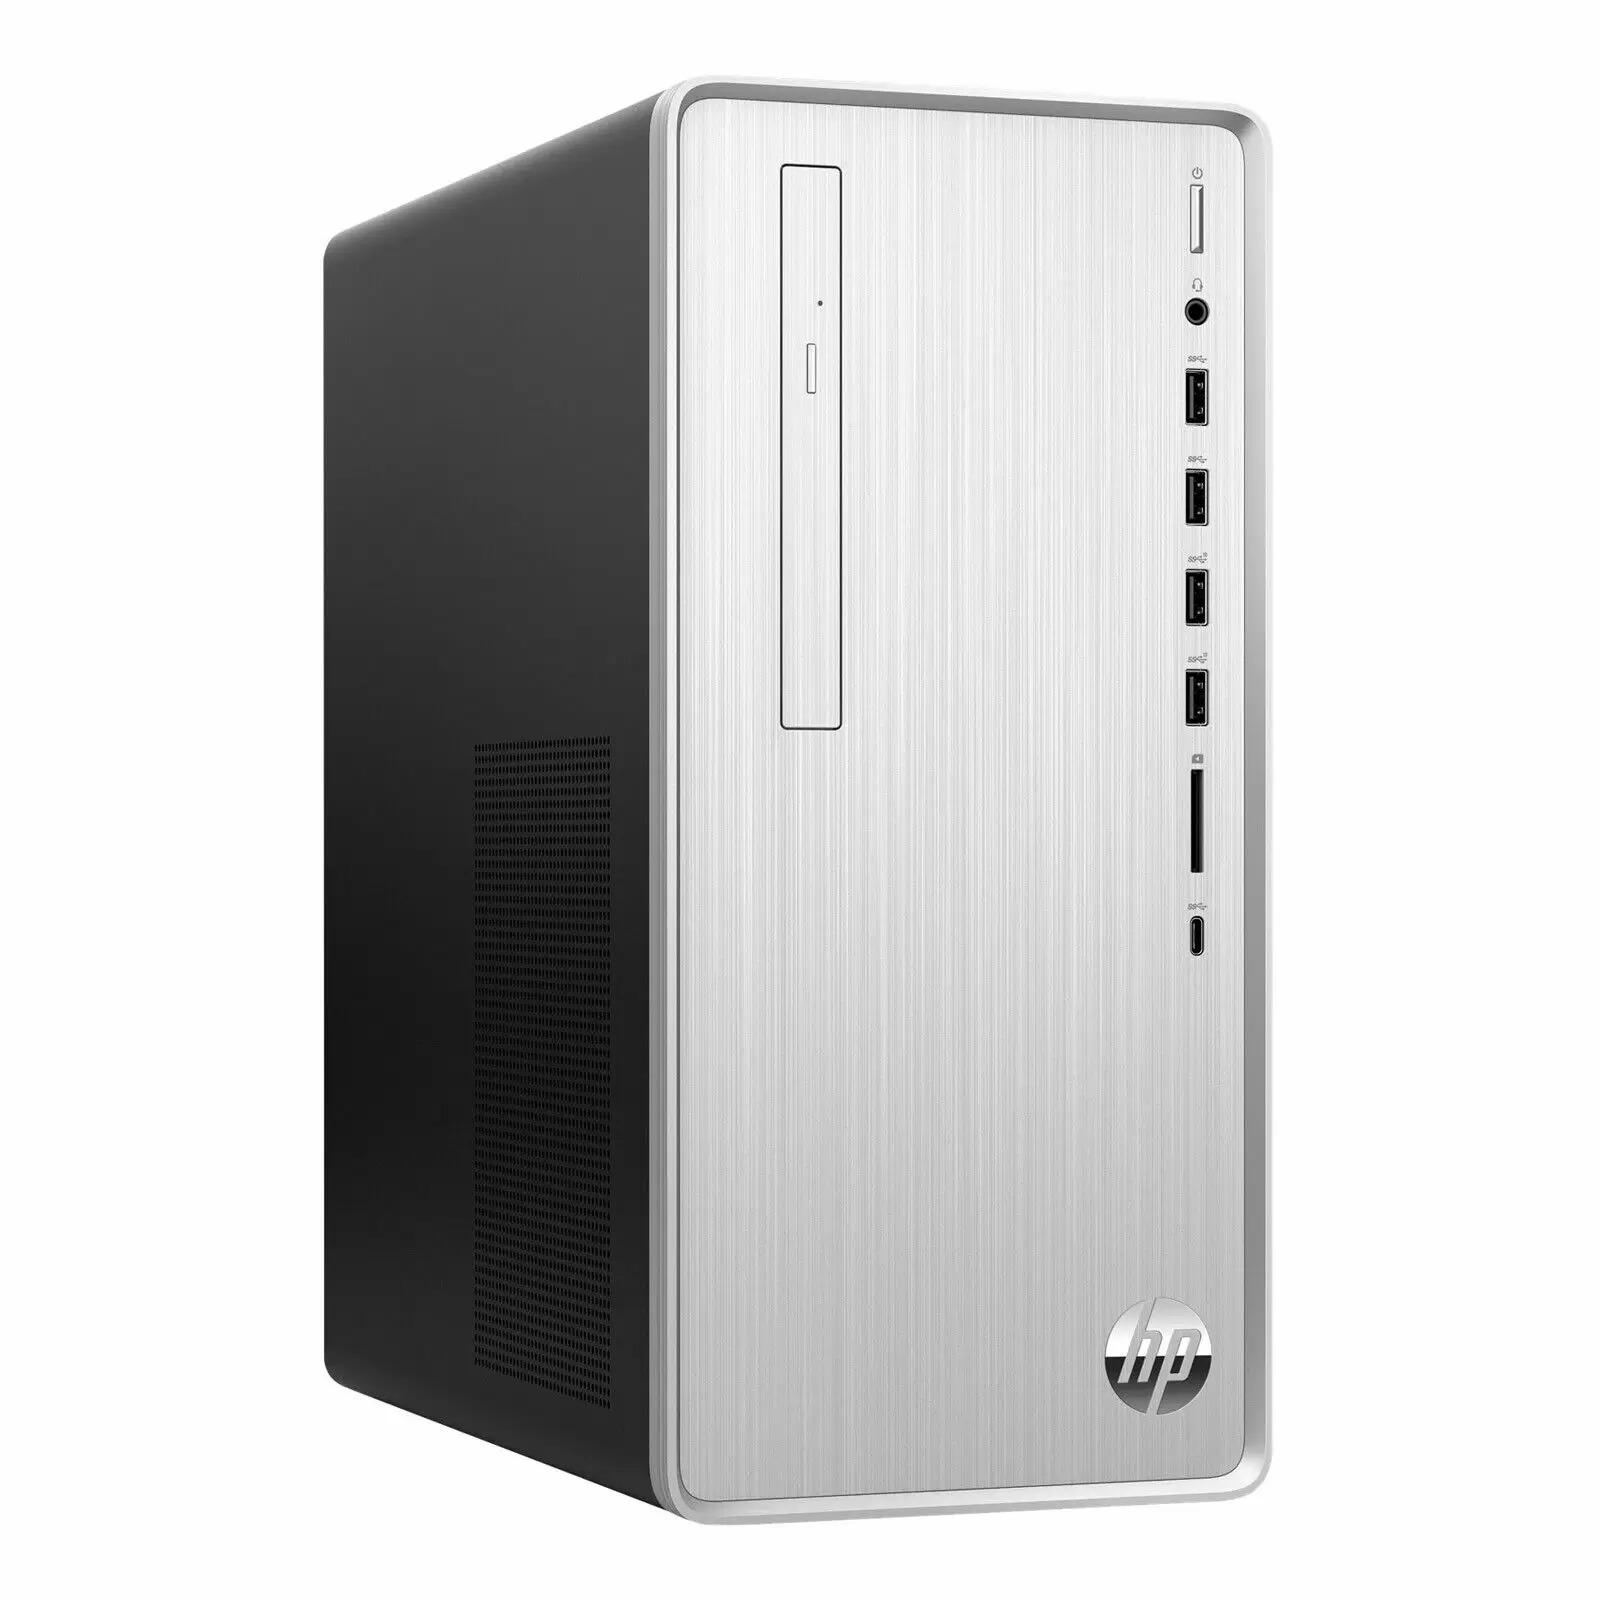 HP TP01-2256 Intel i5 12GB 256GB Desktop Computer System for $359 Shipped